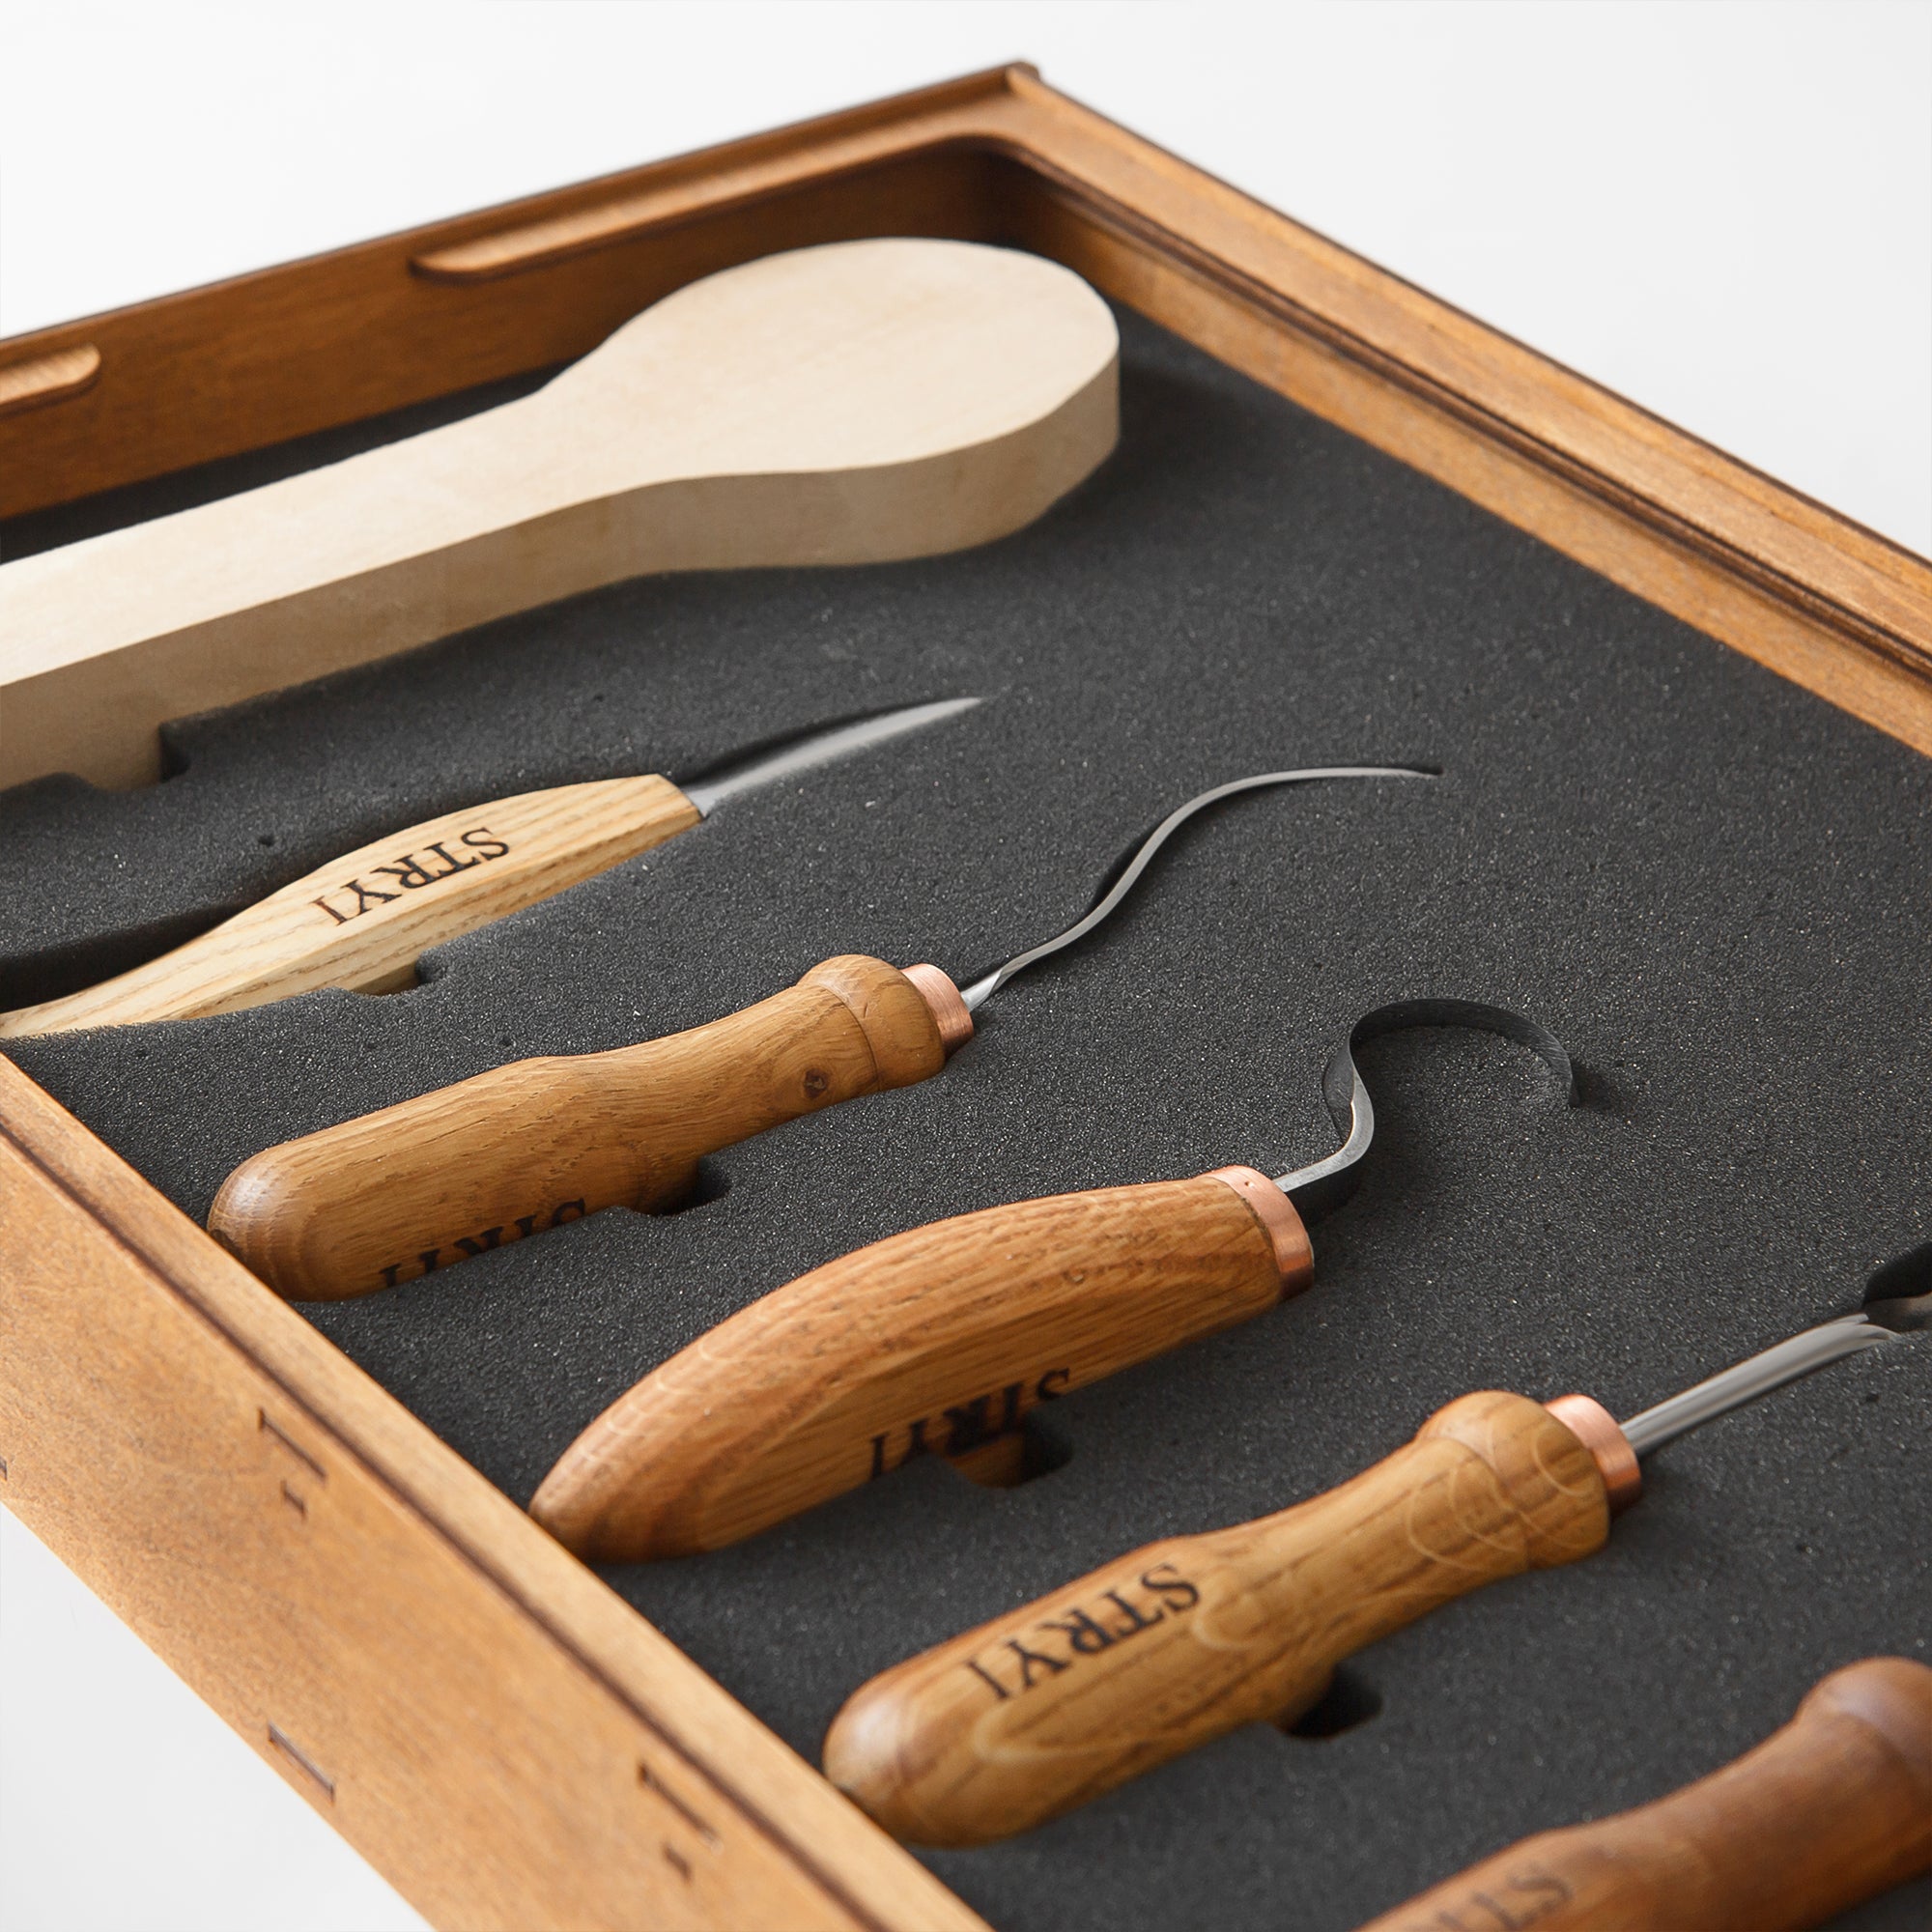 Narex 9 Piece Carving Chisel Set in Wooden Presentation Box